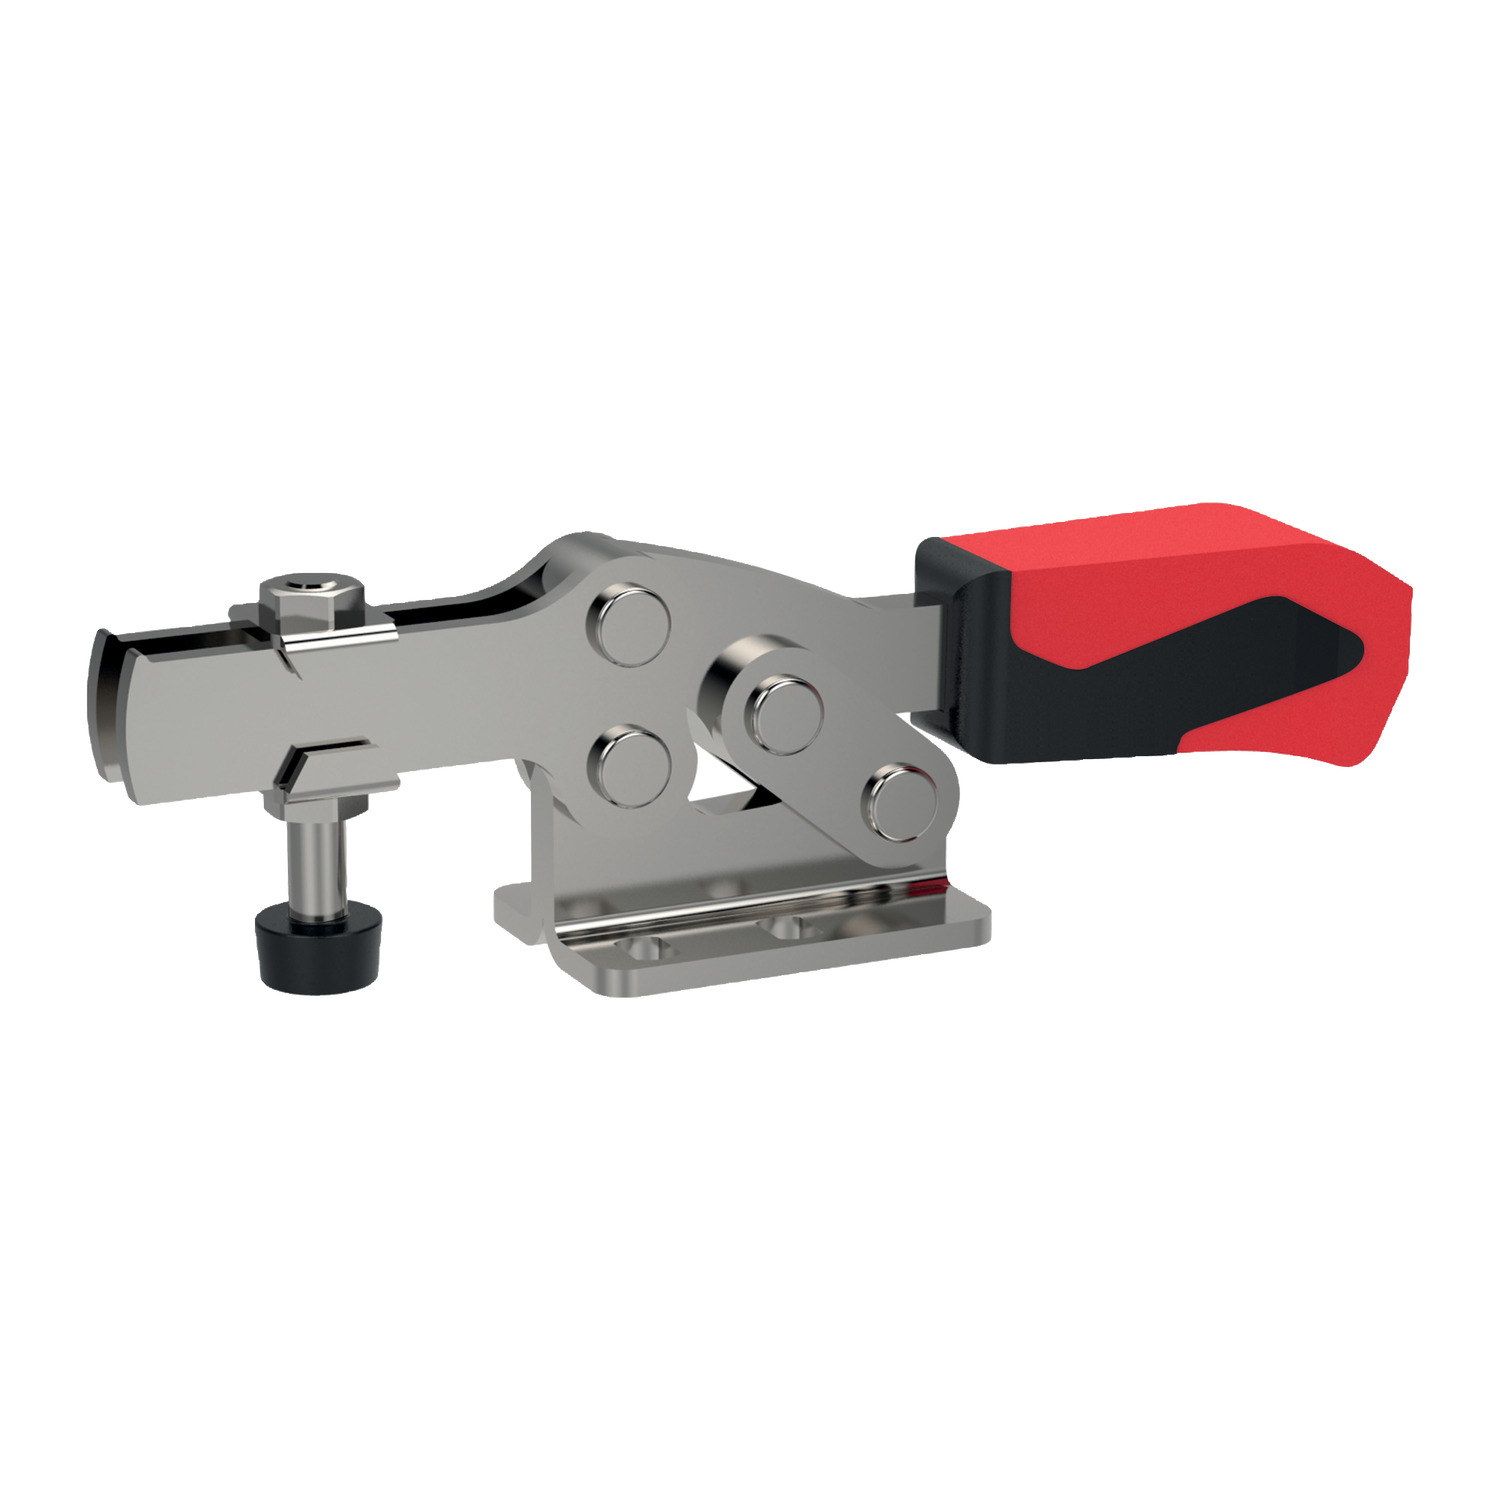 Product 41001.1, Horizontal Toggle Clamp Plus open arm - horizontal base - increased clamping force / 